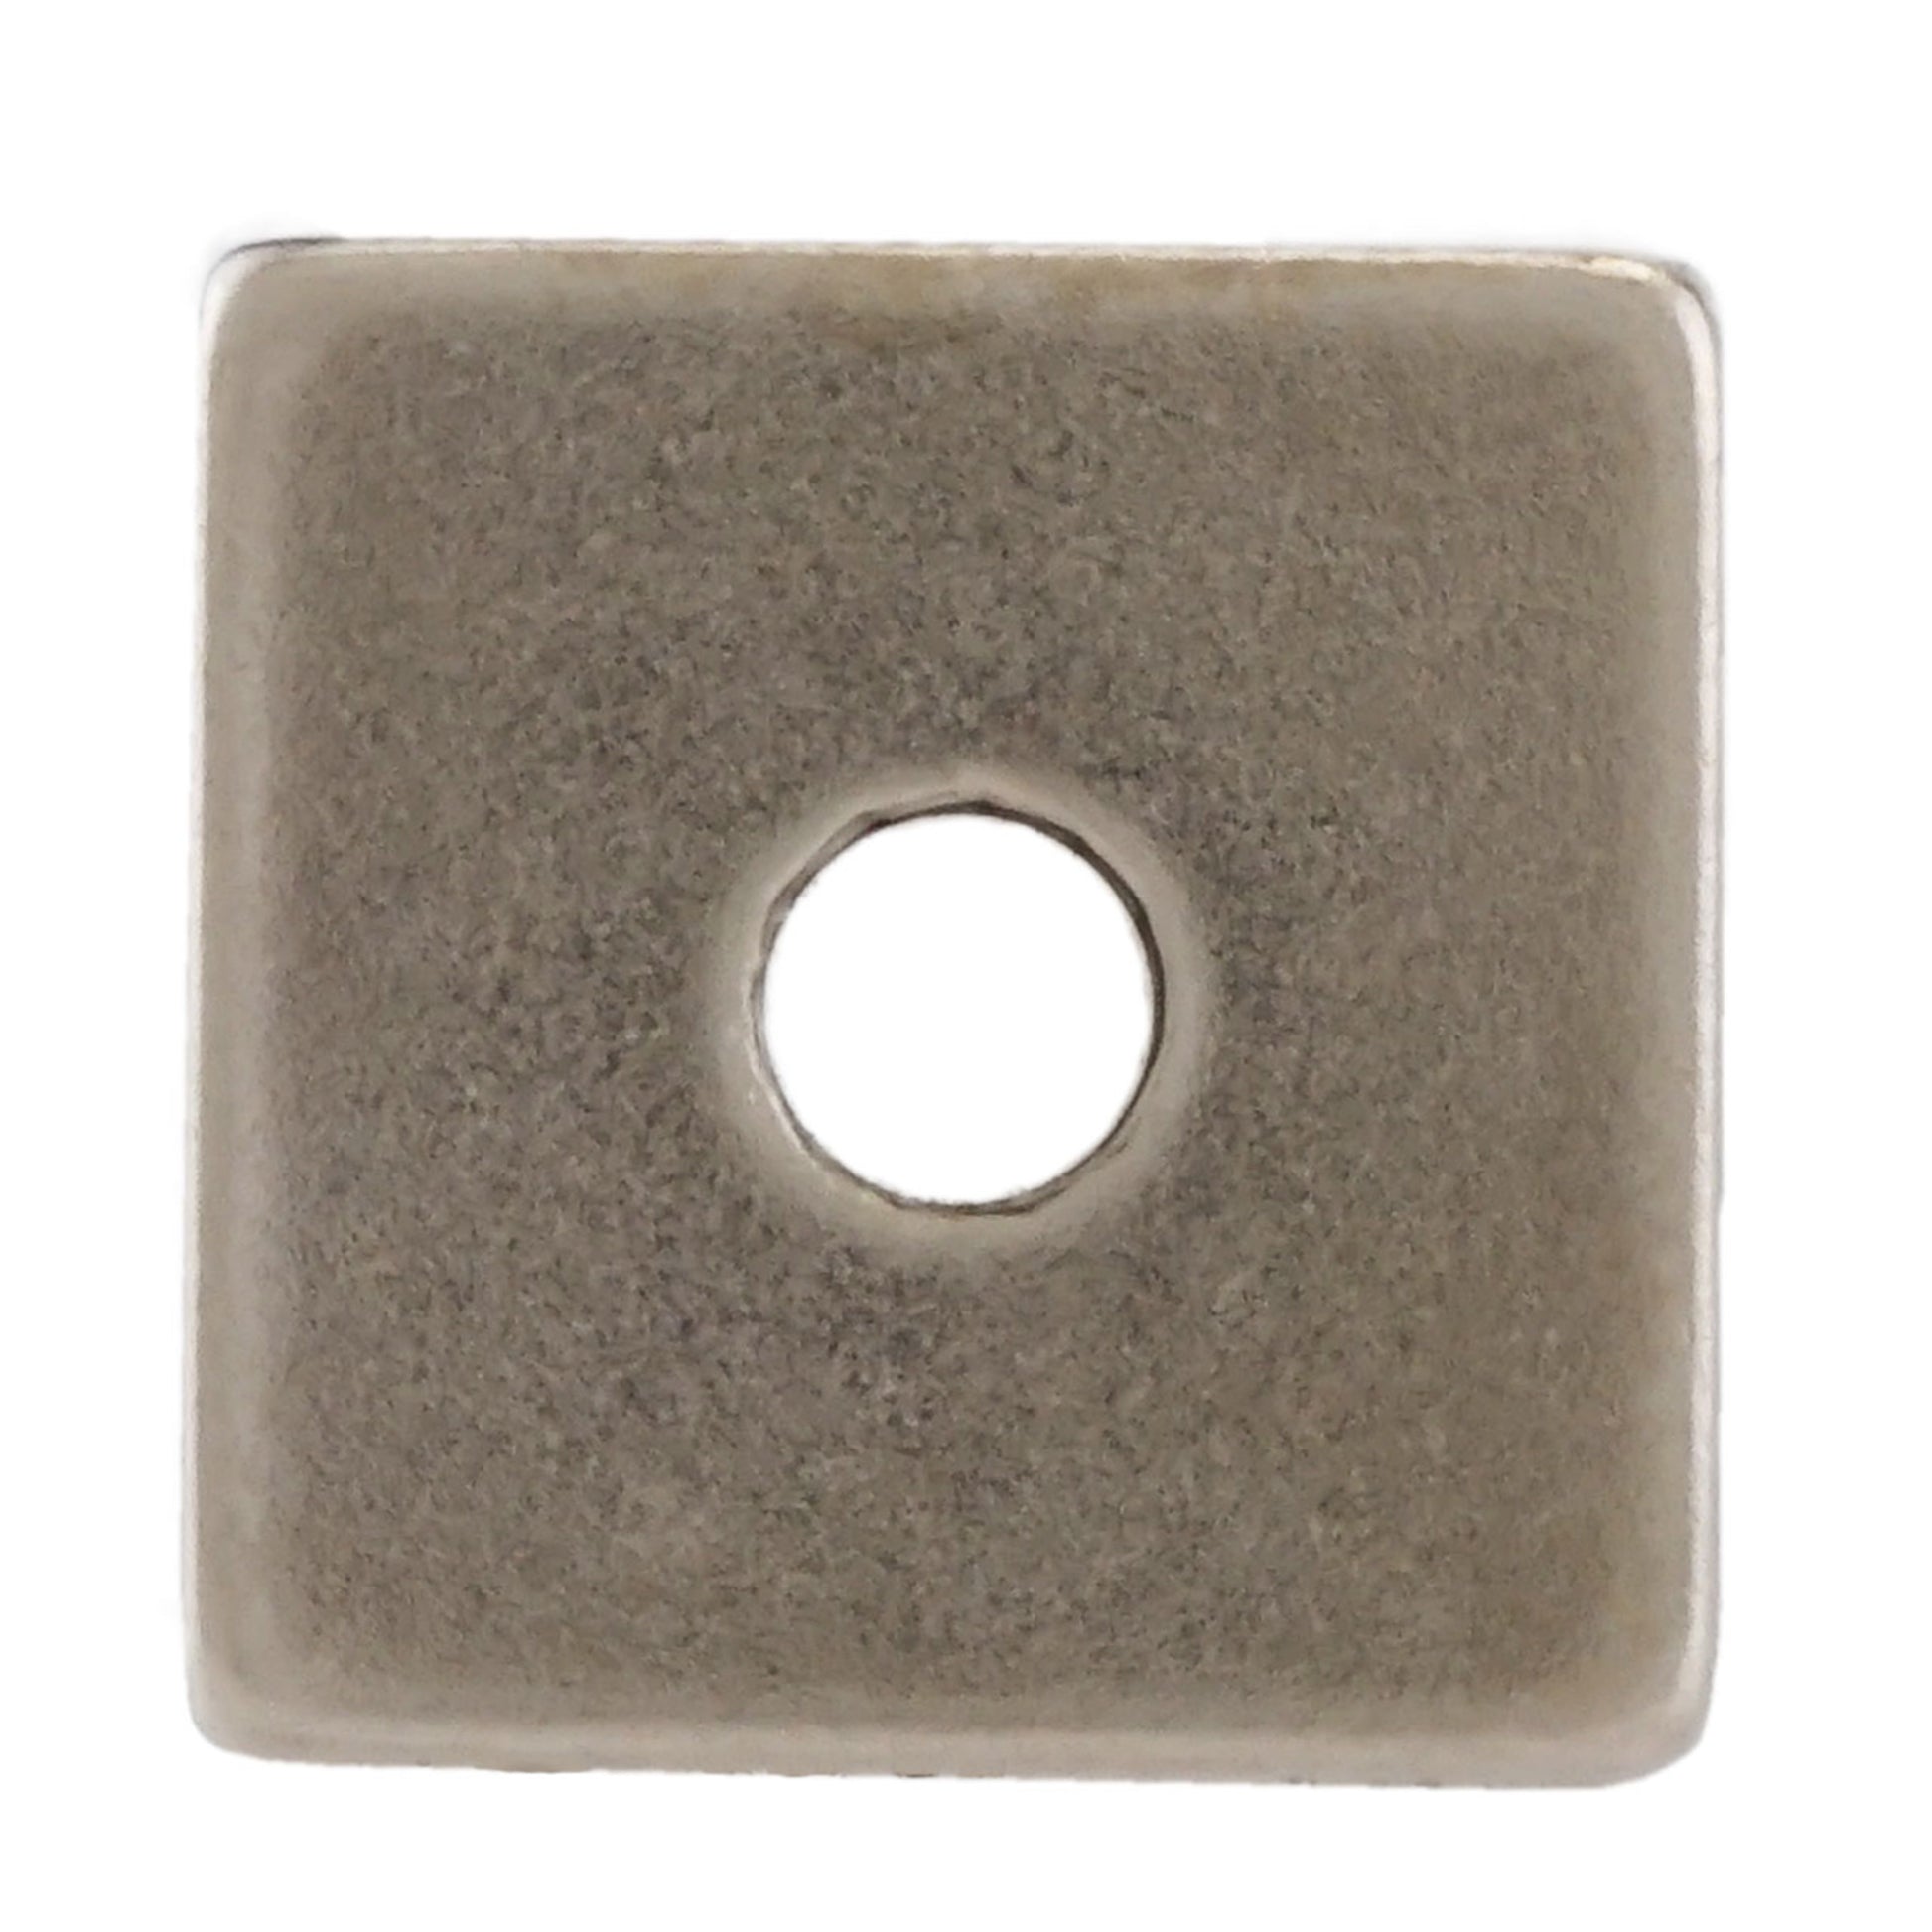 Load image into Gallery viewer, NB007502NS01 Neodymium Block Magnet with hole - Top View